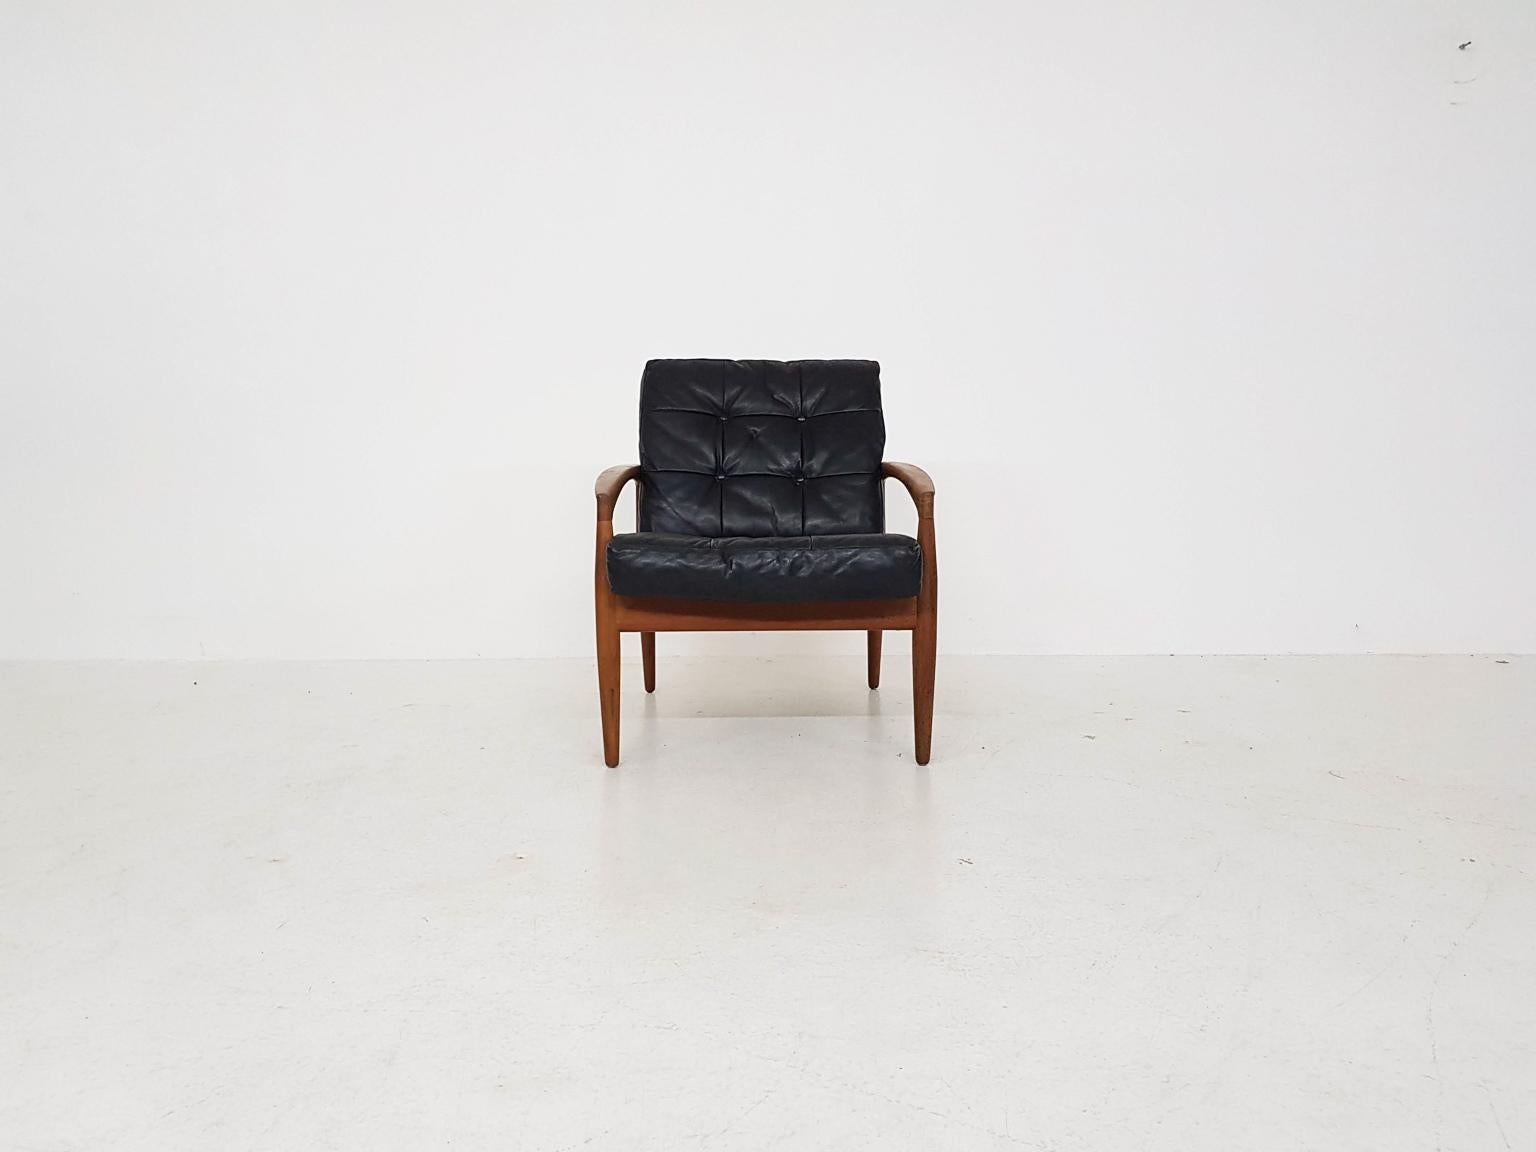 Leather and teak paperknife lounge chair by Kai Kristiansen for Magnus Olesen Durup, Denmark 1955.

Original and vintage paperknife lounge chair, with black padded leather cushions in good condition. Chair is marked in frame. The chair received